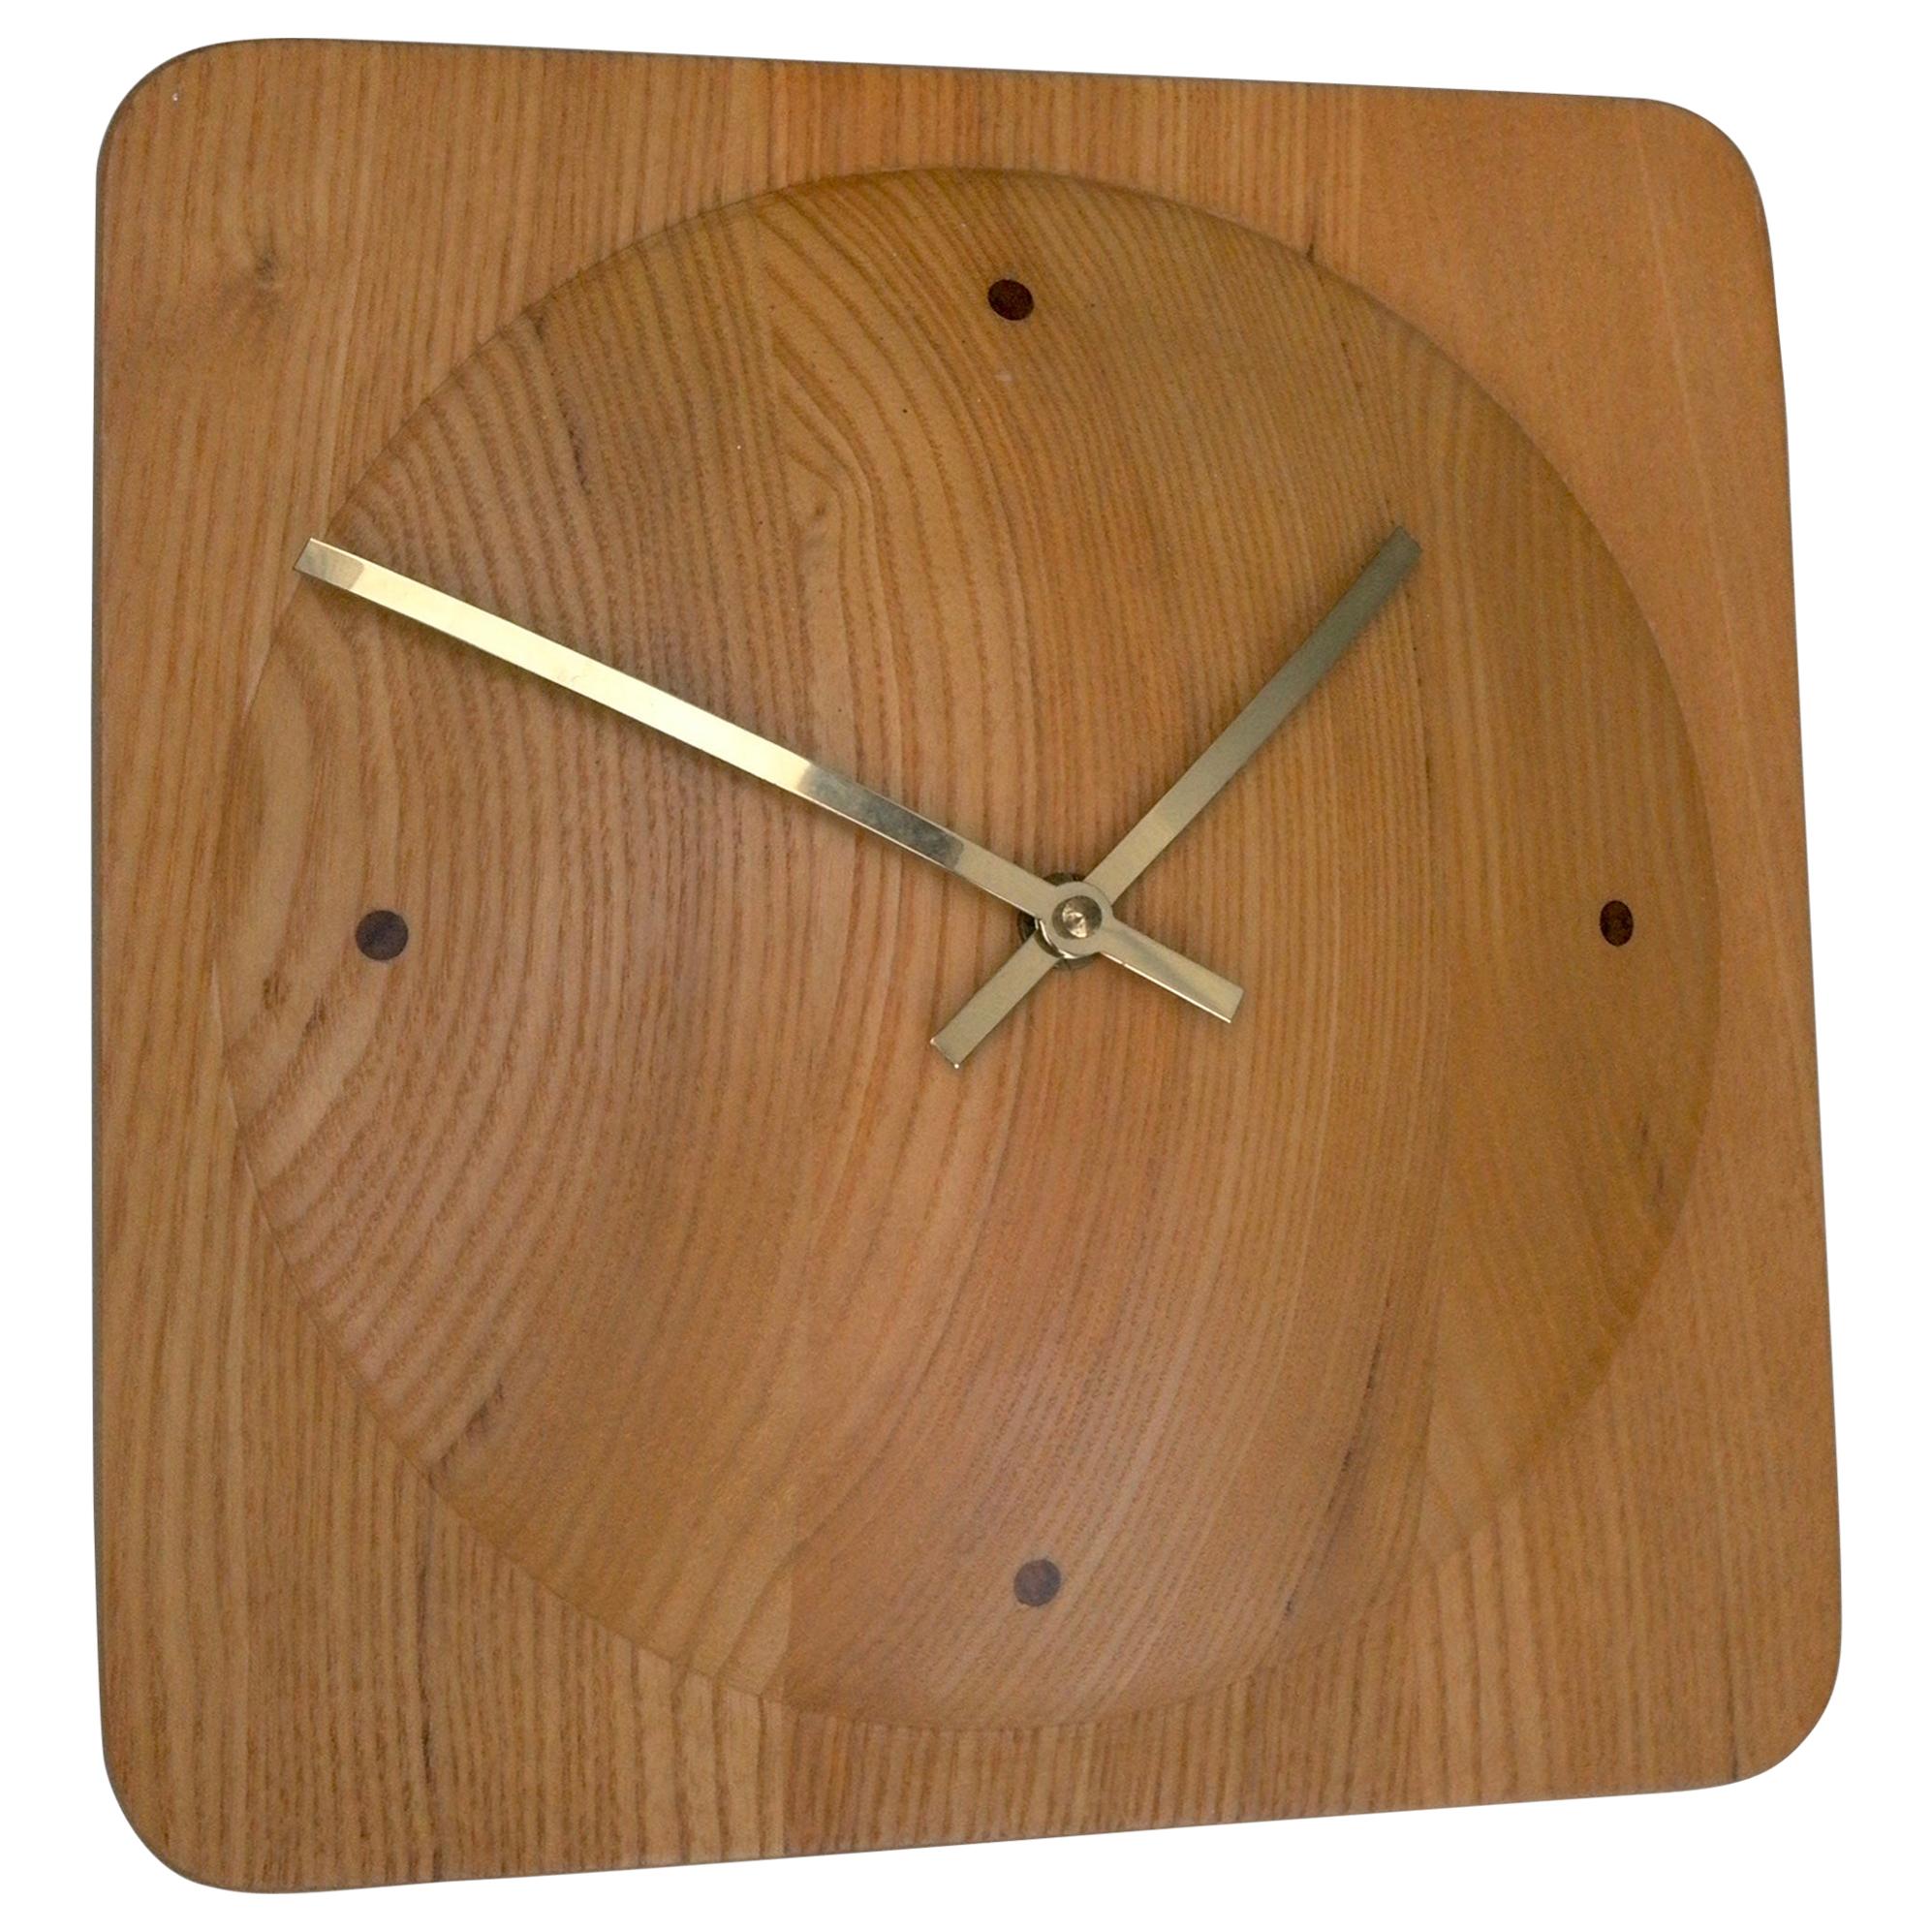 Danish Mid-Century Modern Pine and Brass Wall Clock For Sale